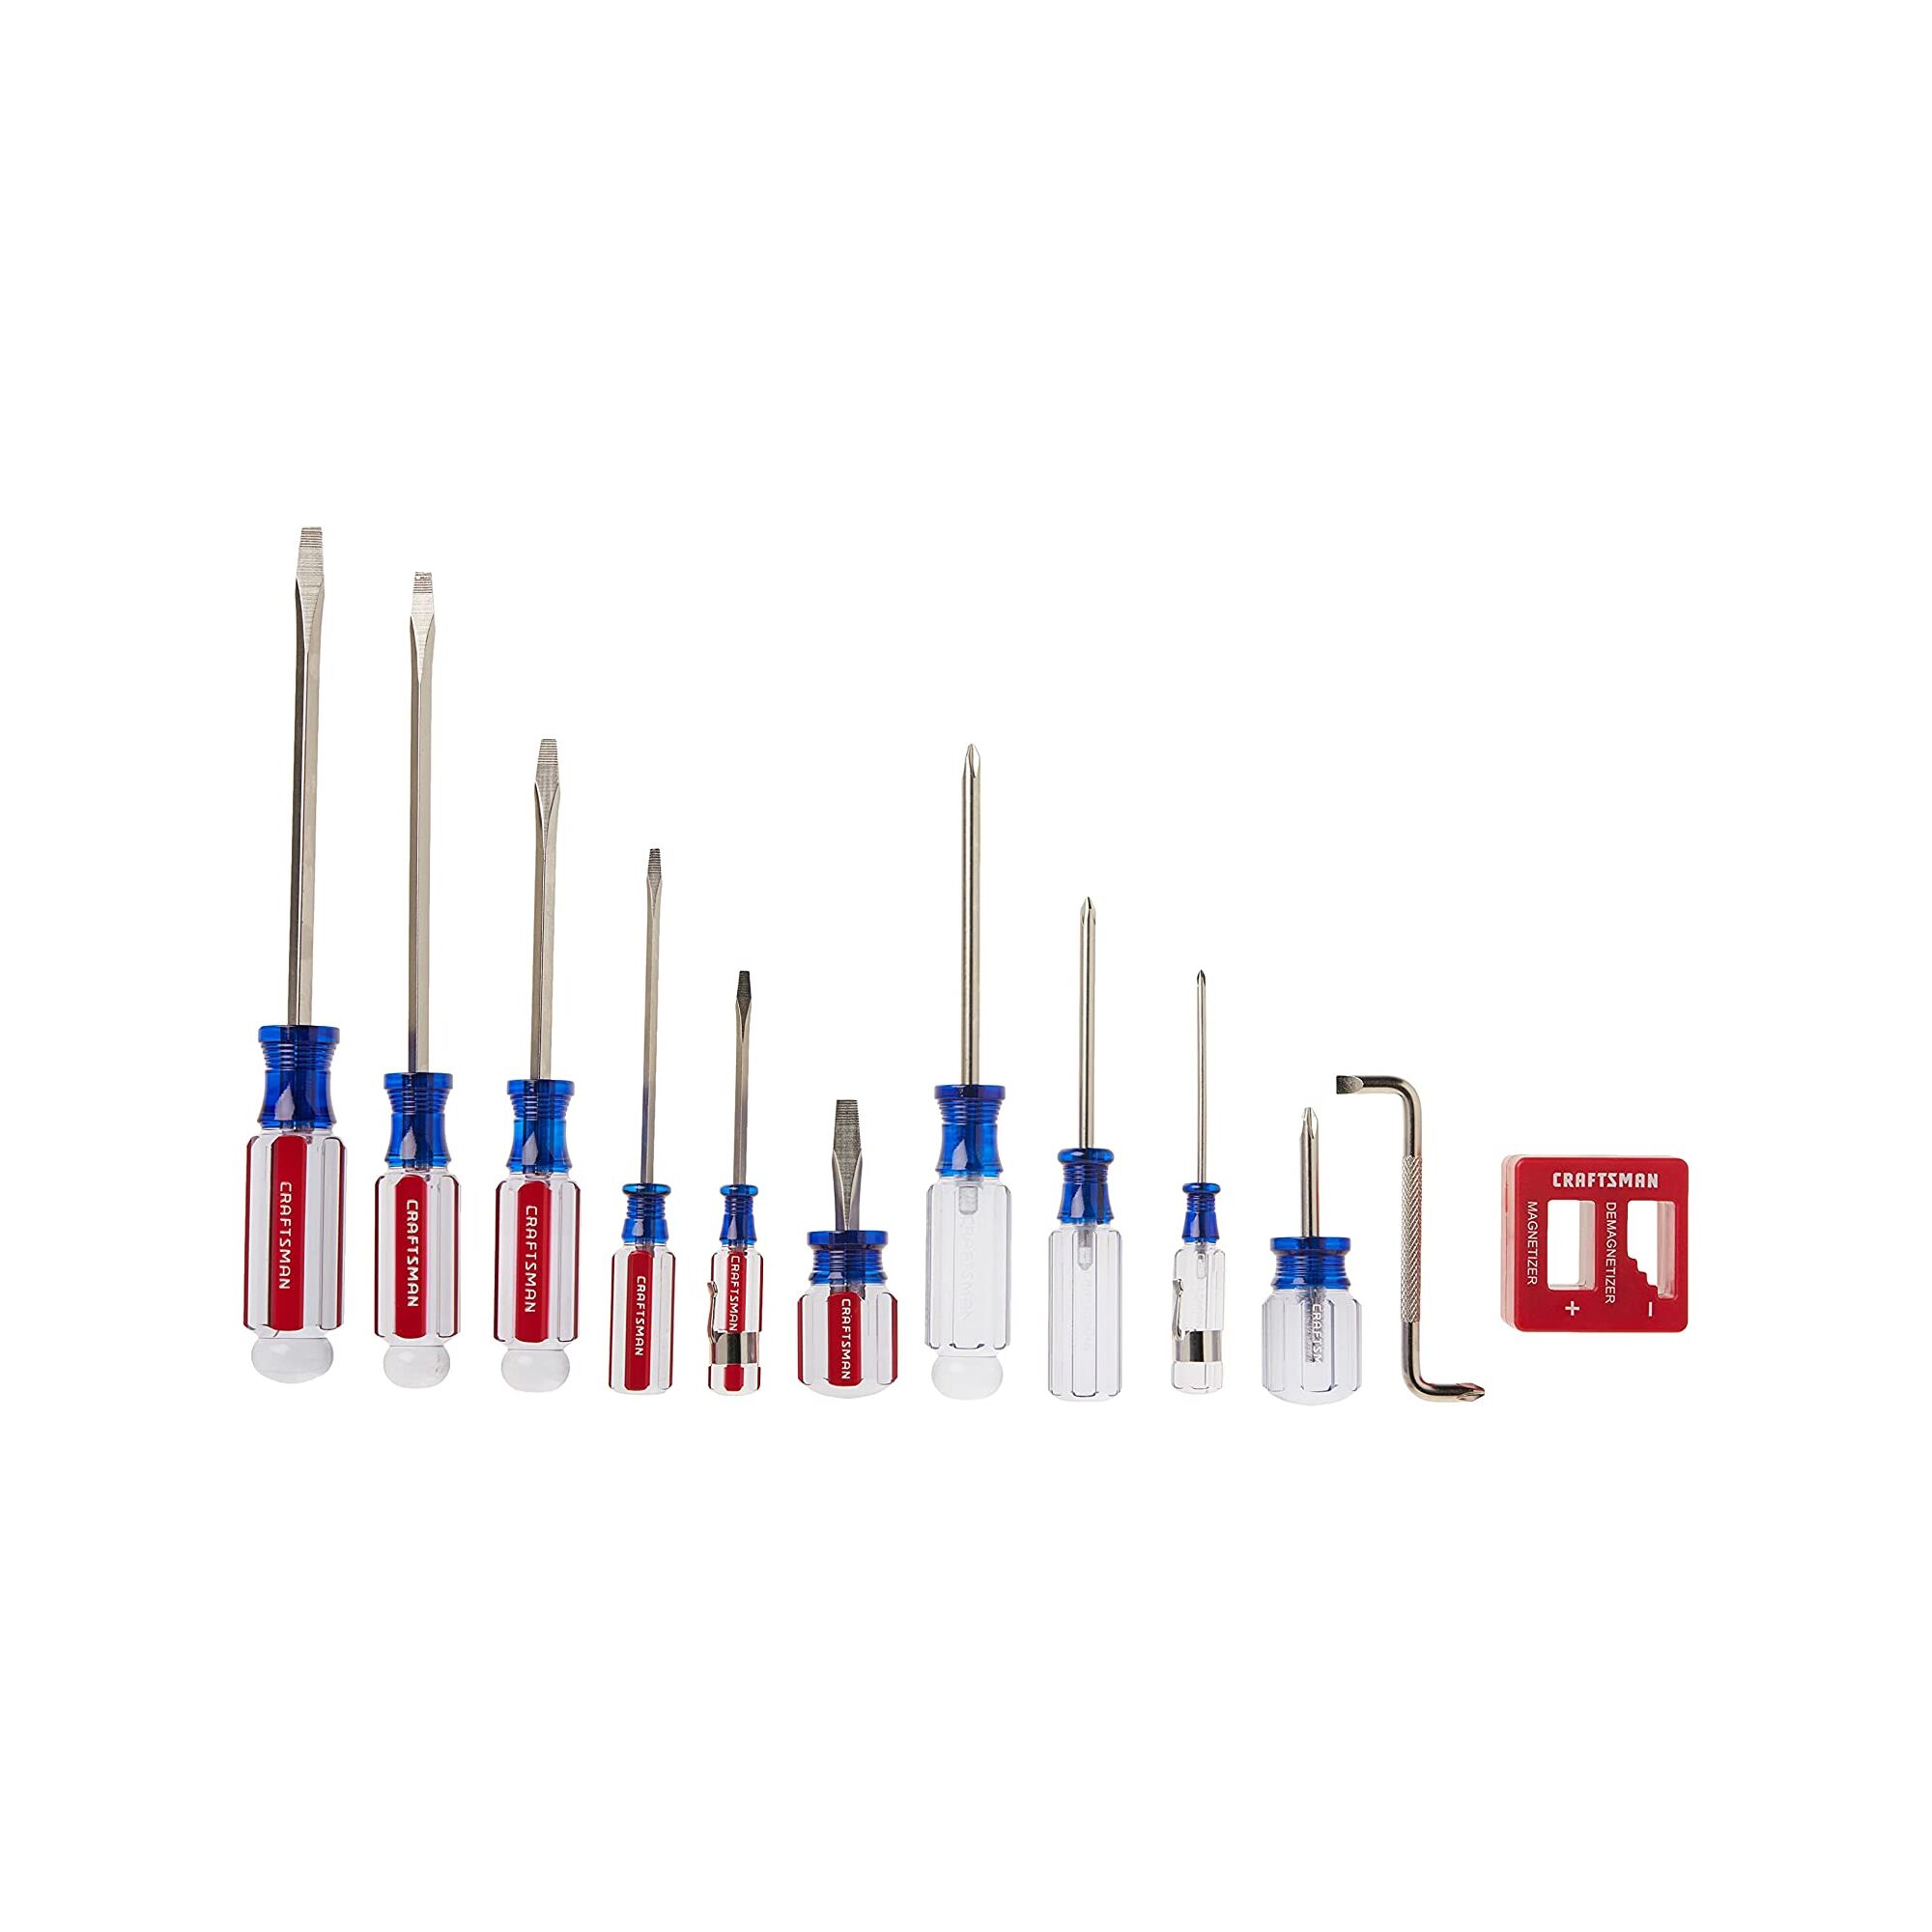 View of CRAFTSMAN Screwdrivers: Acetate family of products